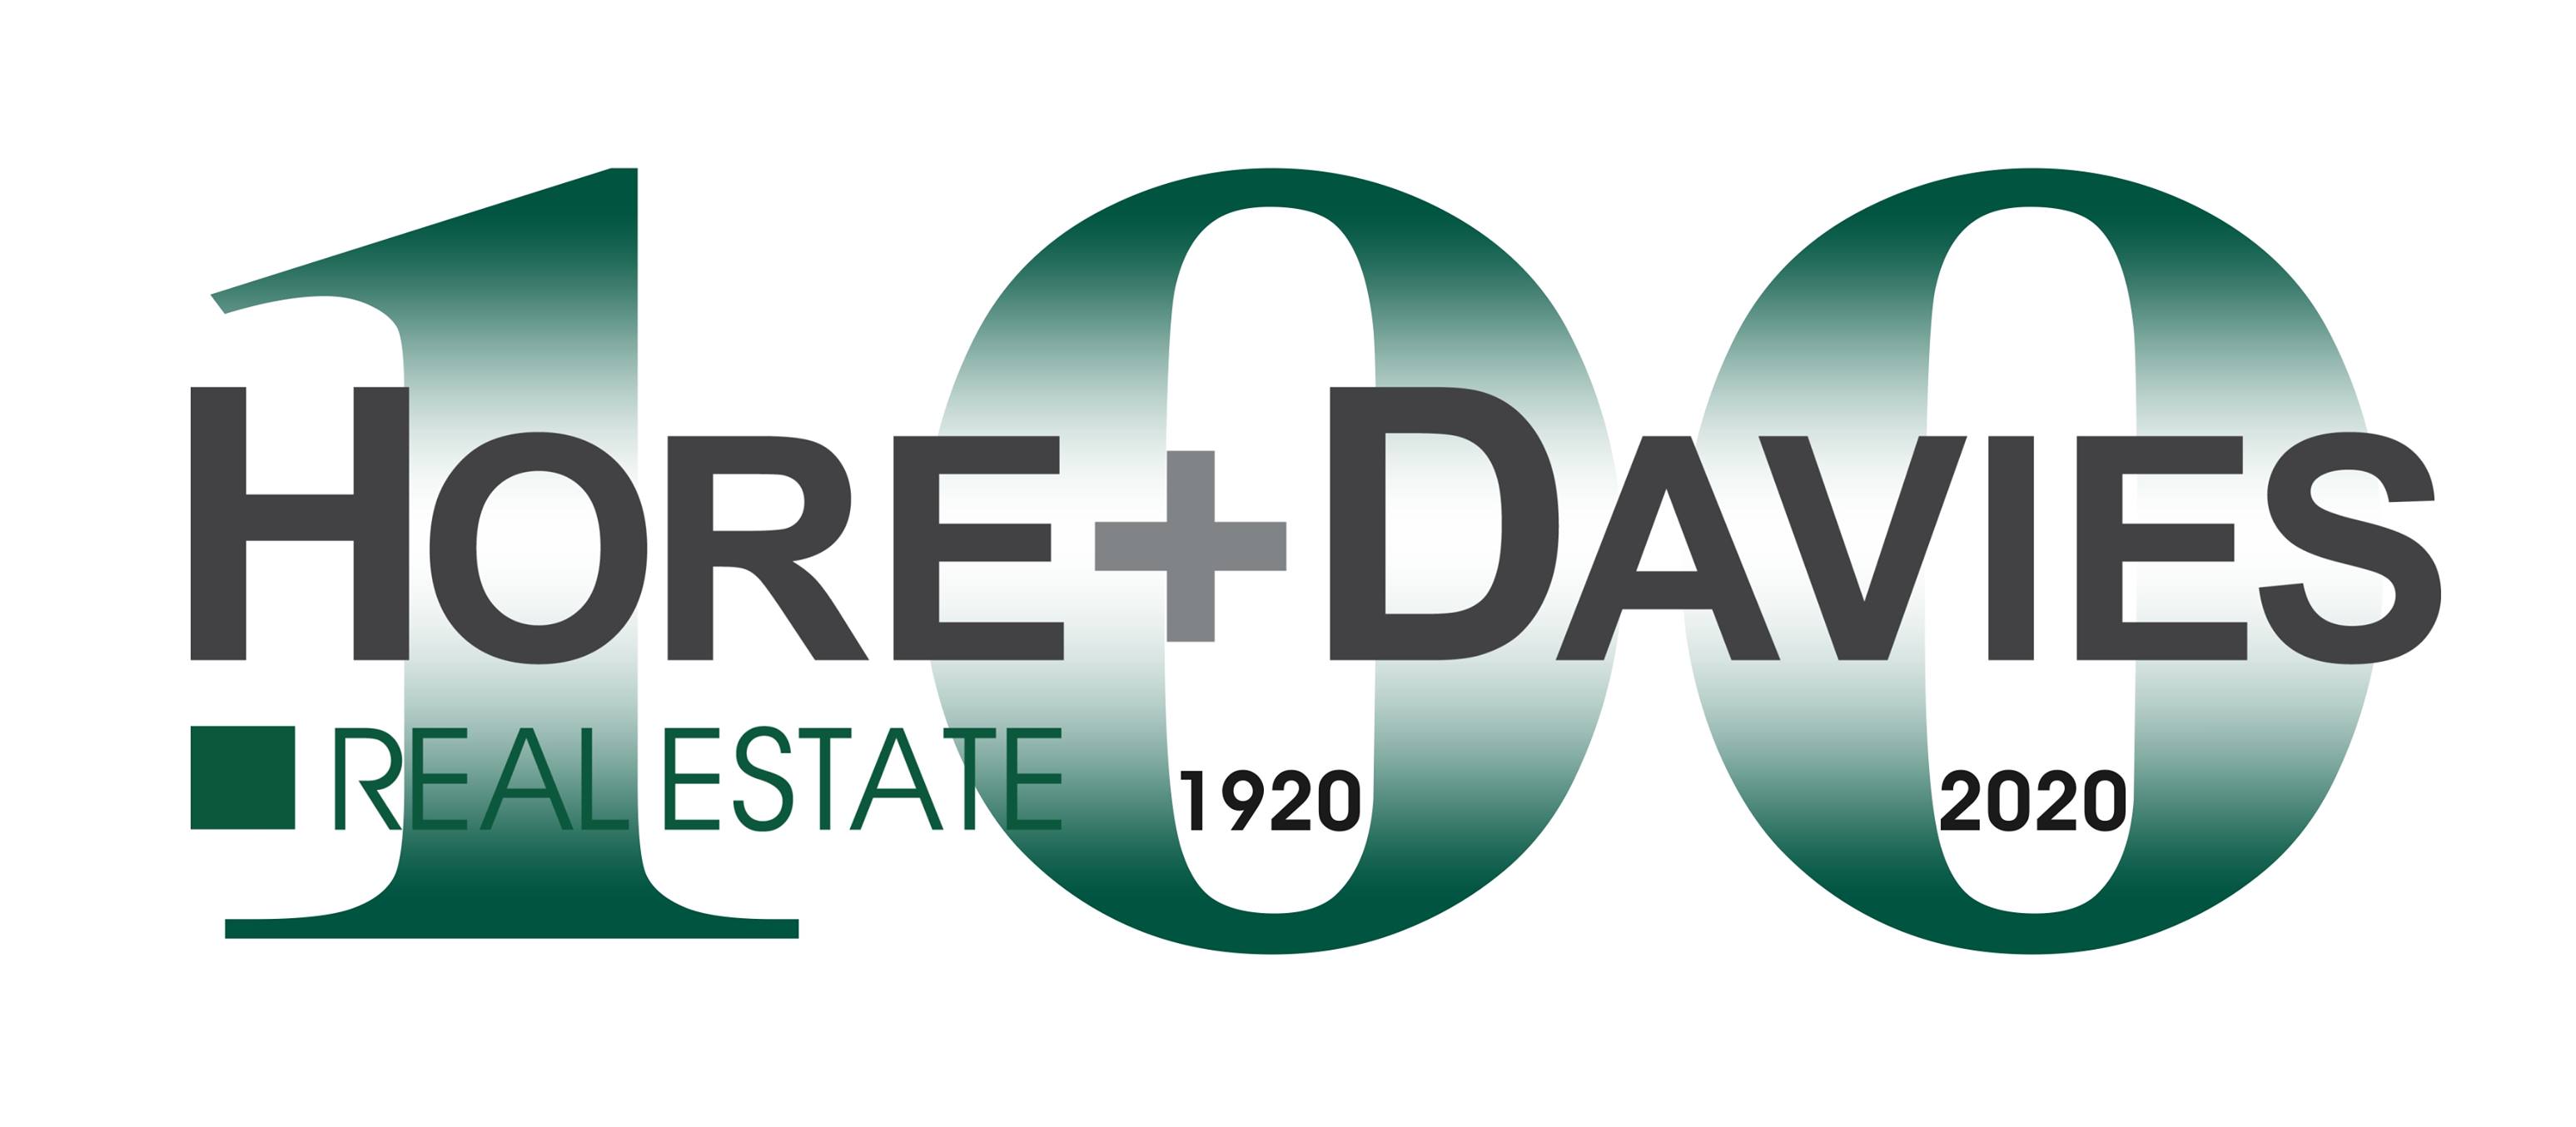 Hore and Davies Real Estate